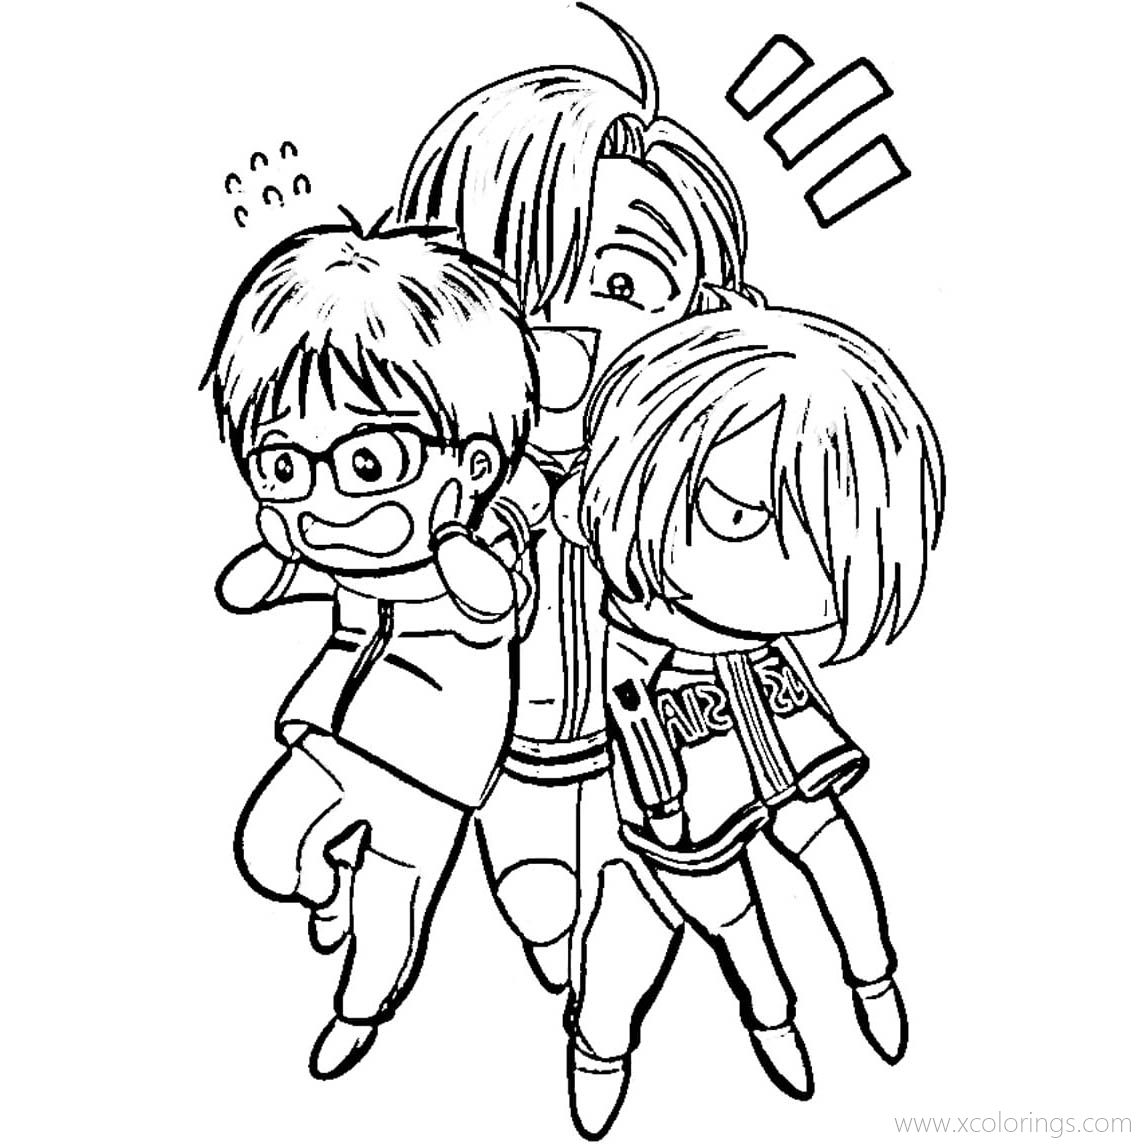 Free Yuri on Ice Chibi Characters Coloring Pages printable